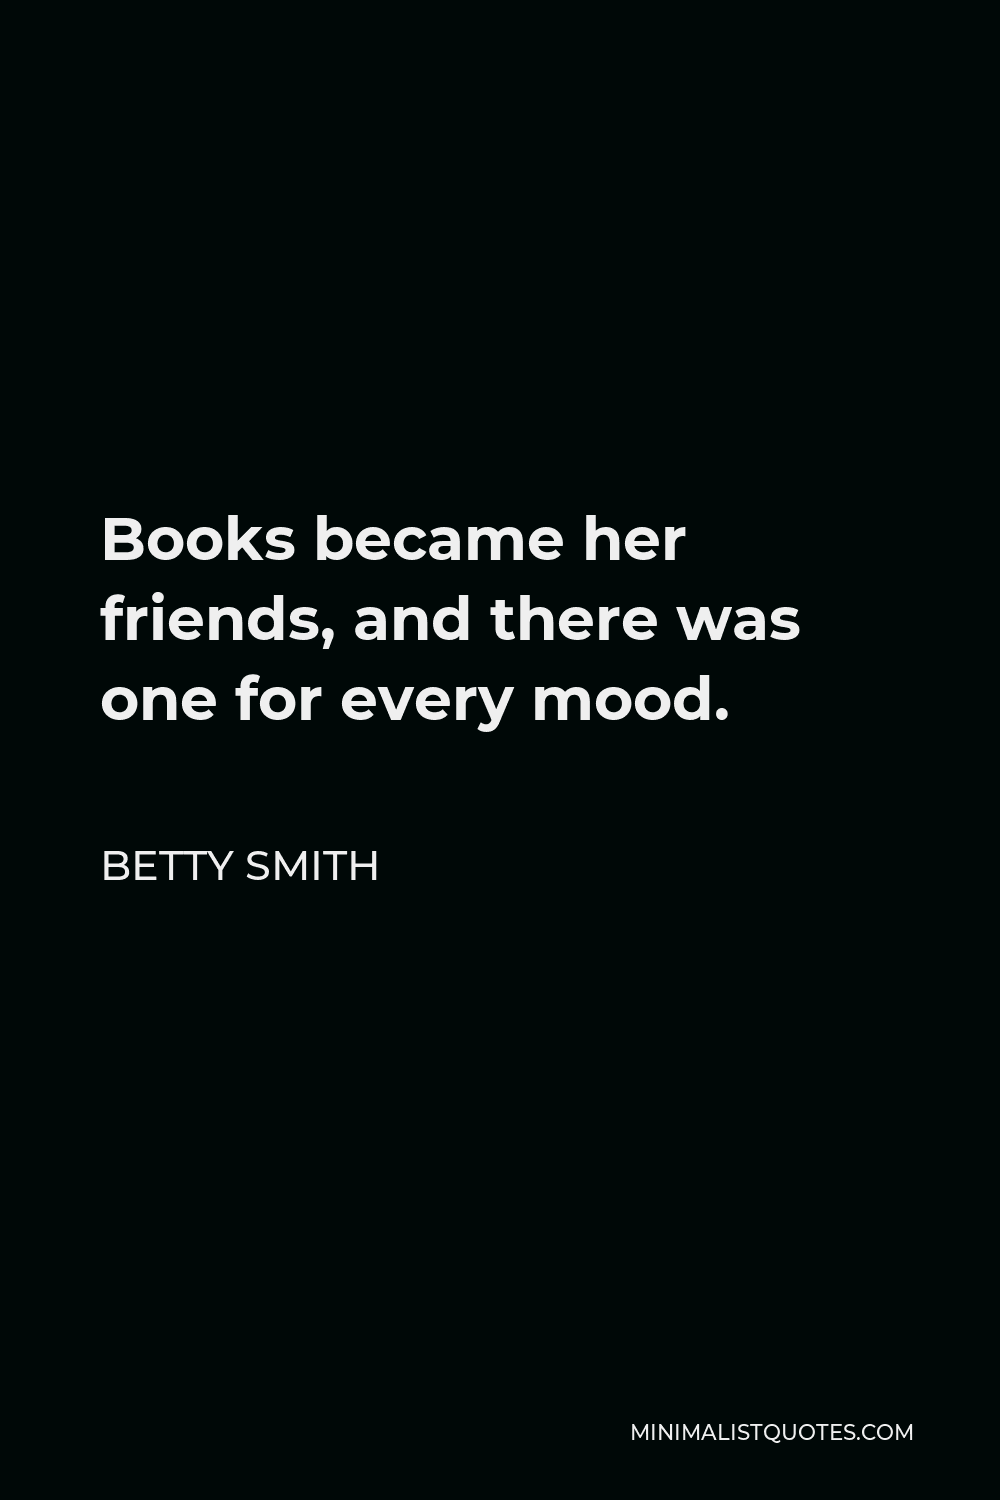 Betty Smith Quote - Books became her friends, and there was one for every mood.